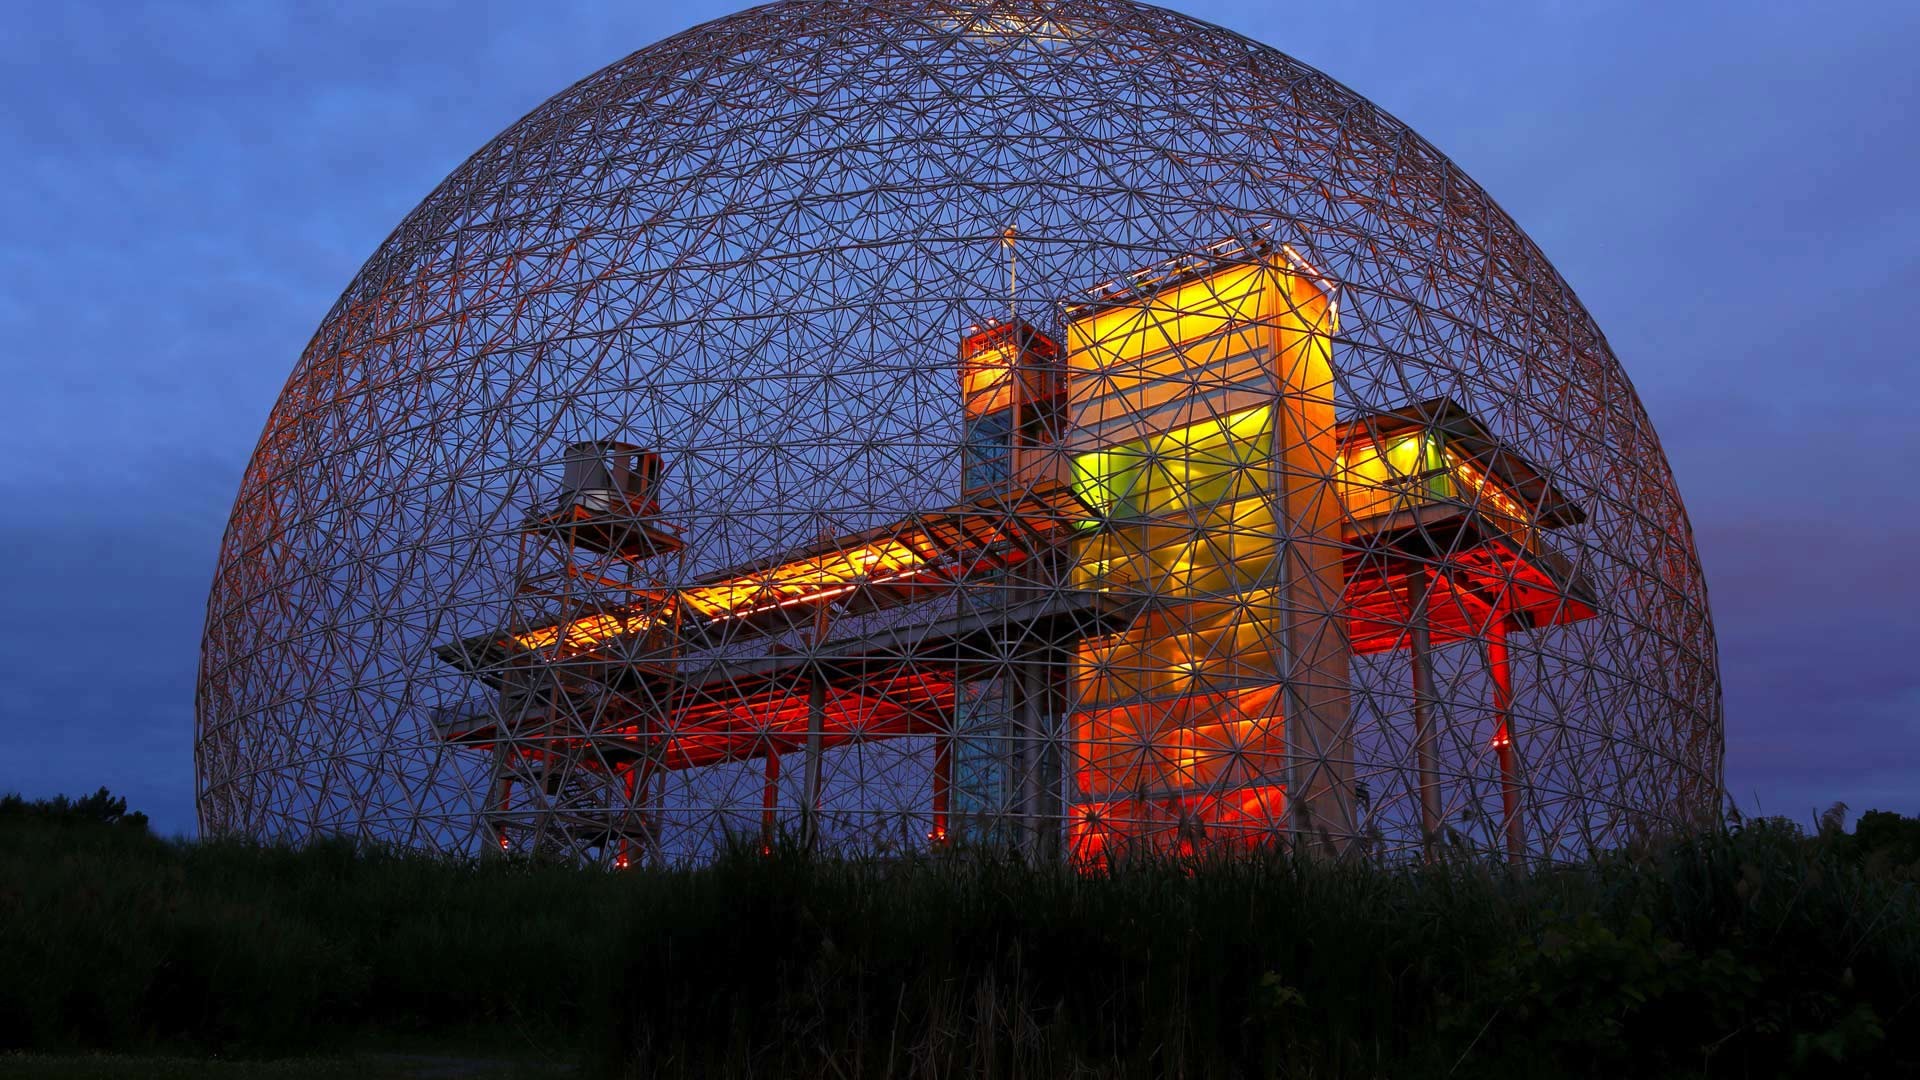 General 1920x1080 architecture modern sphere night sky arena nature grass building pipes Montreal Canada Expo 67